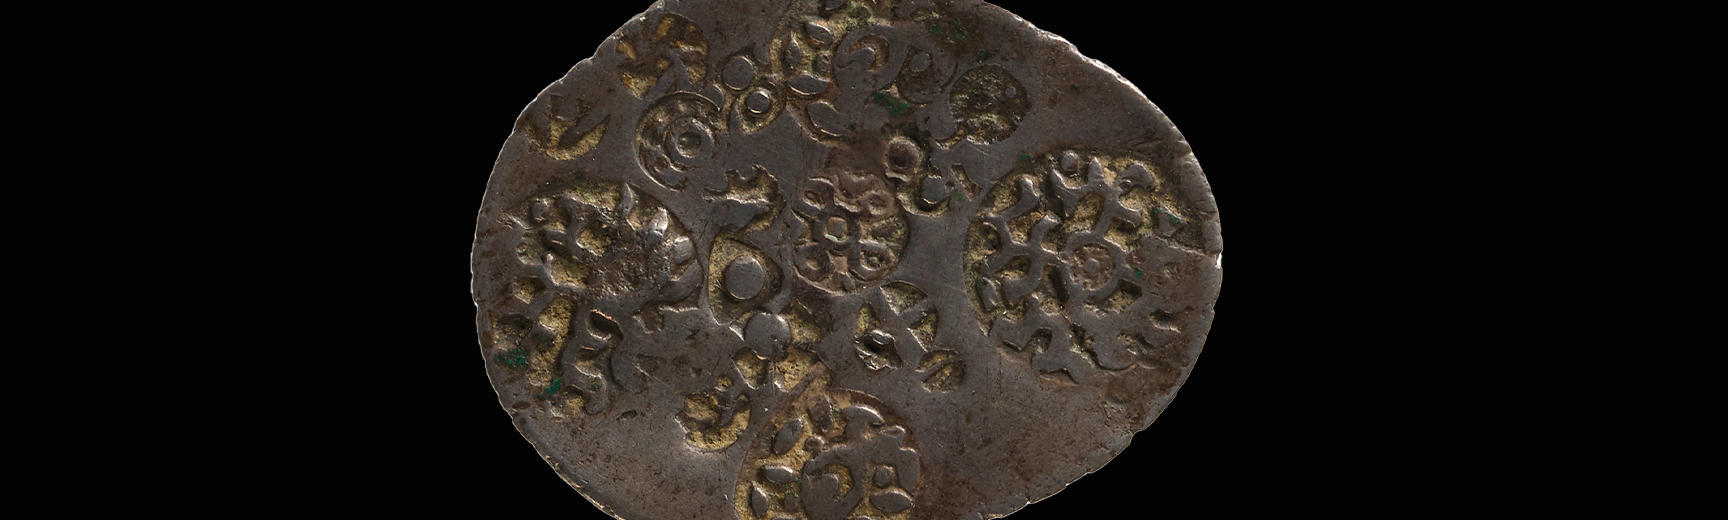 Punch-marked coin from ancient India